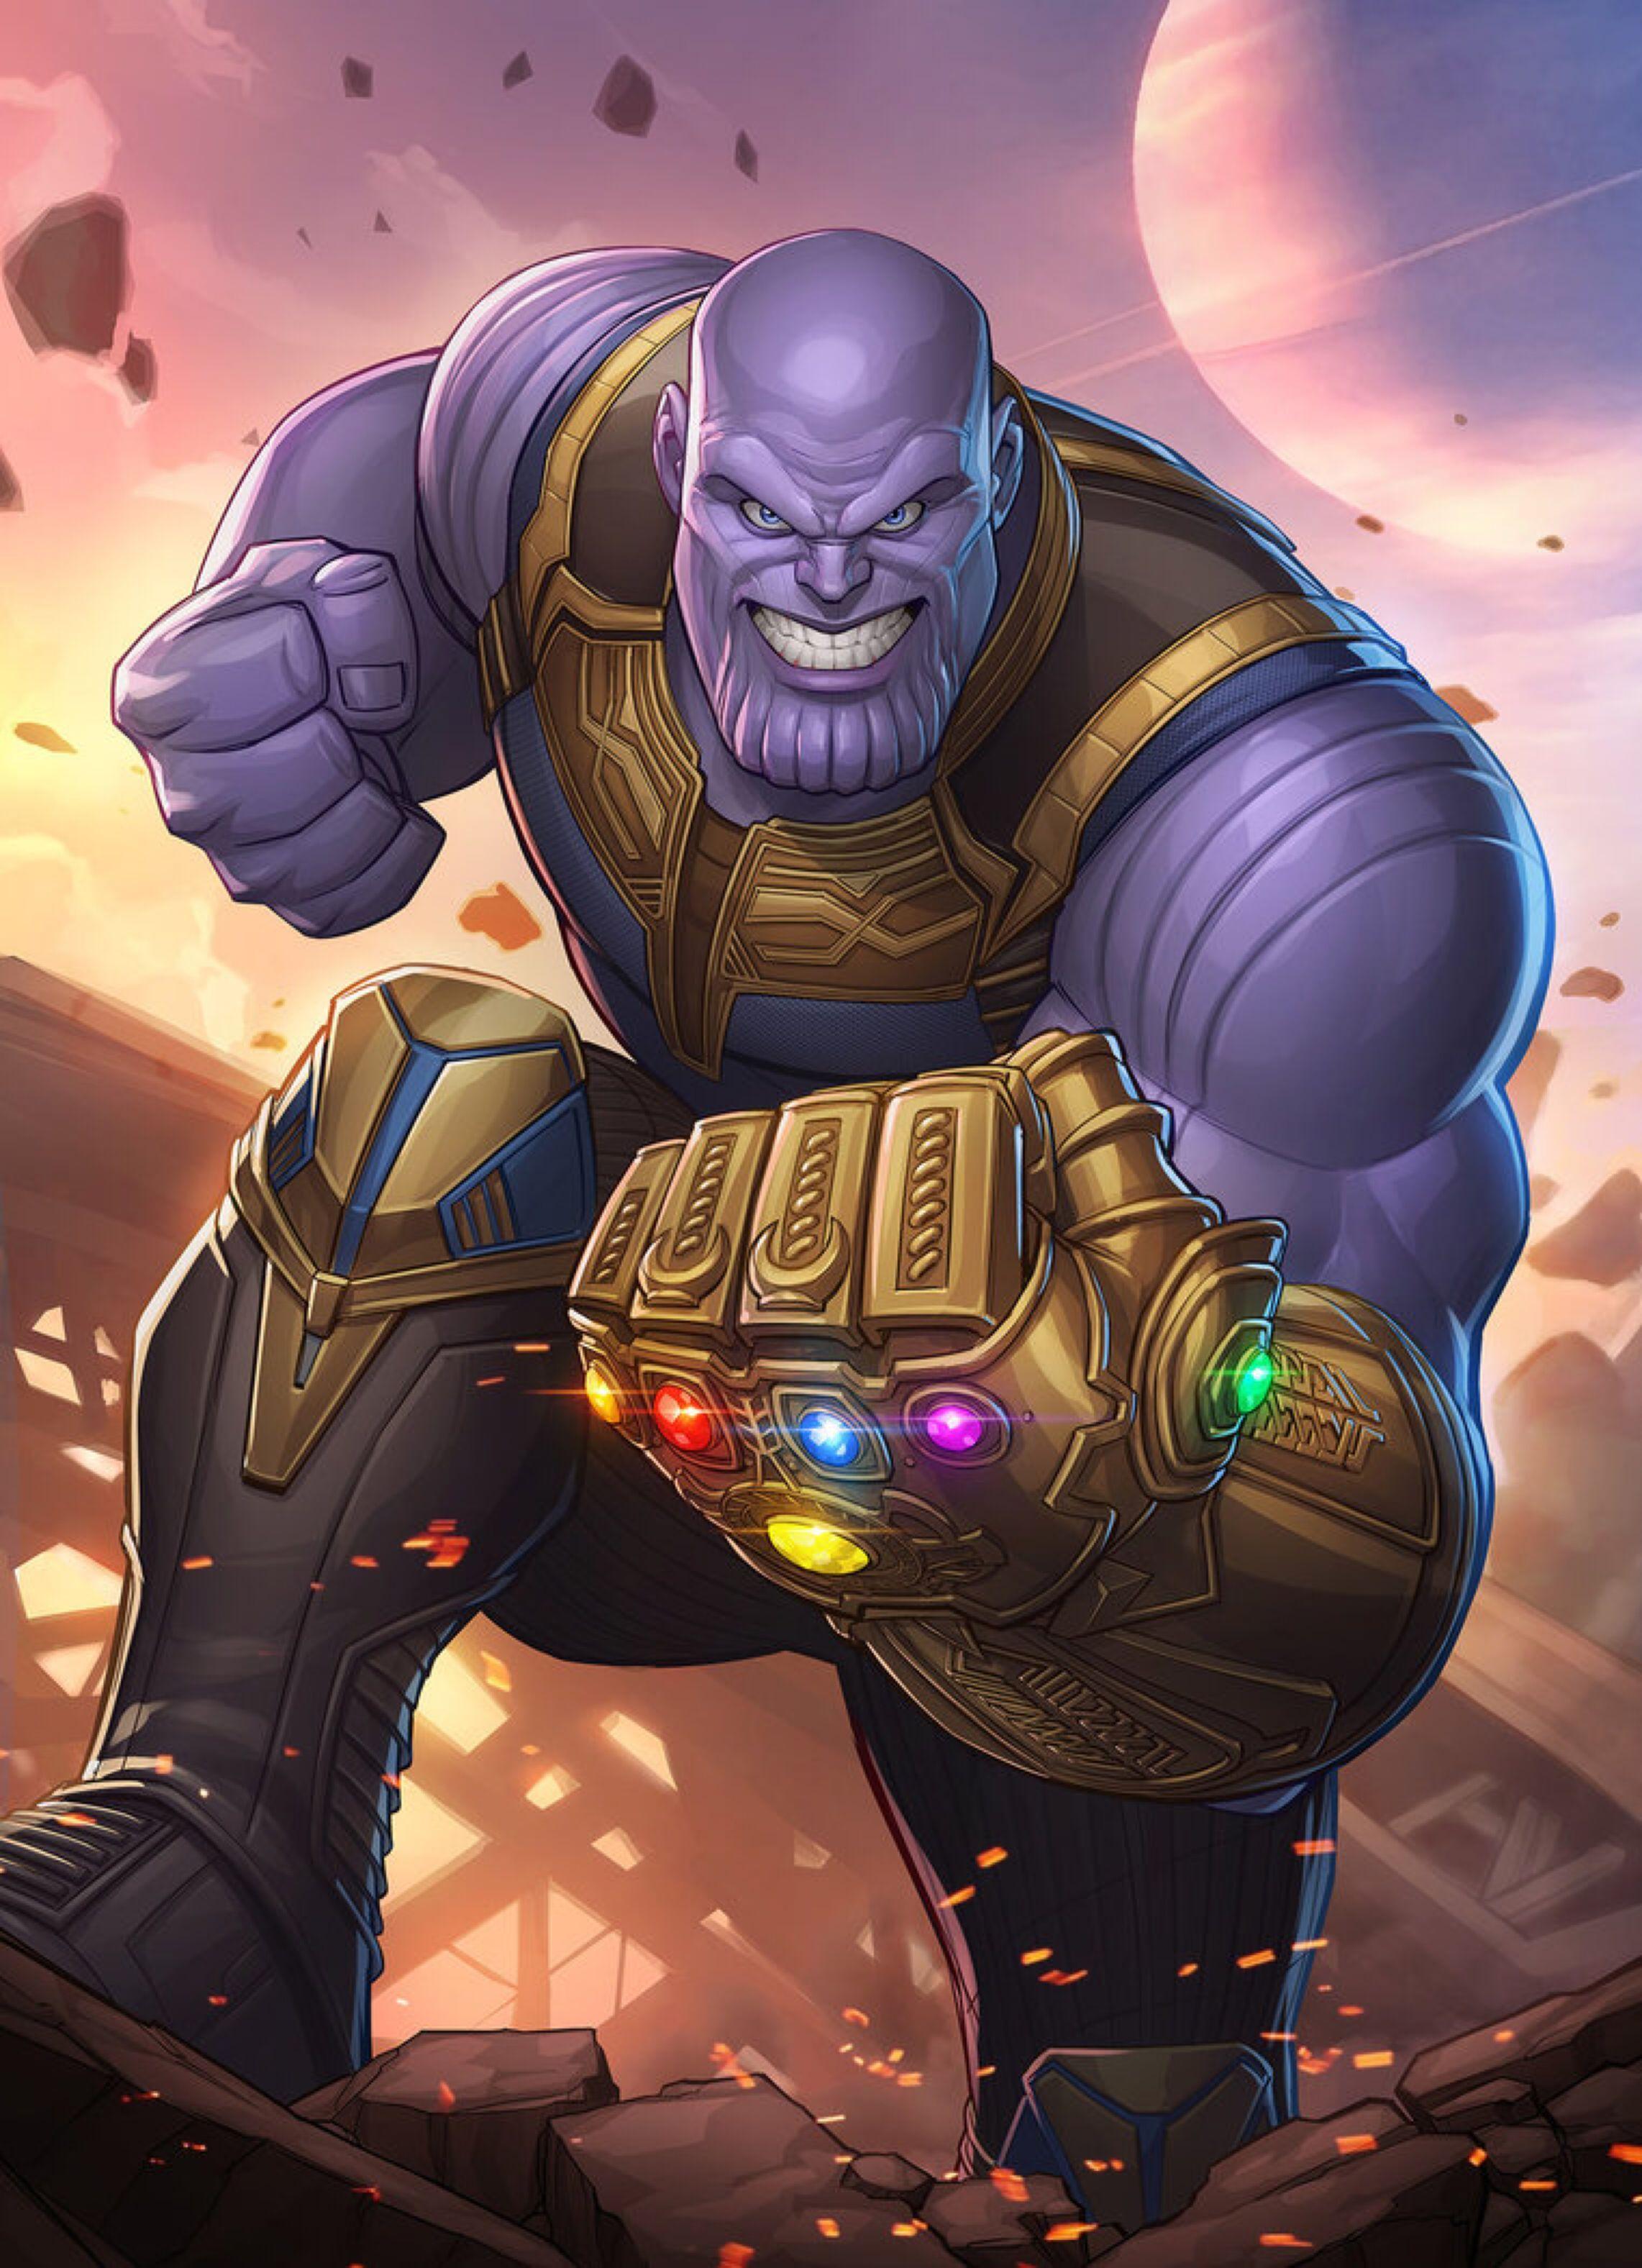 Thanos 4k Wallpapers - Top 25 Best Thanos 4k Wallpapers Download